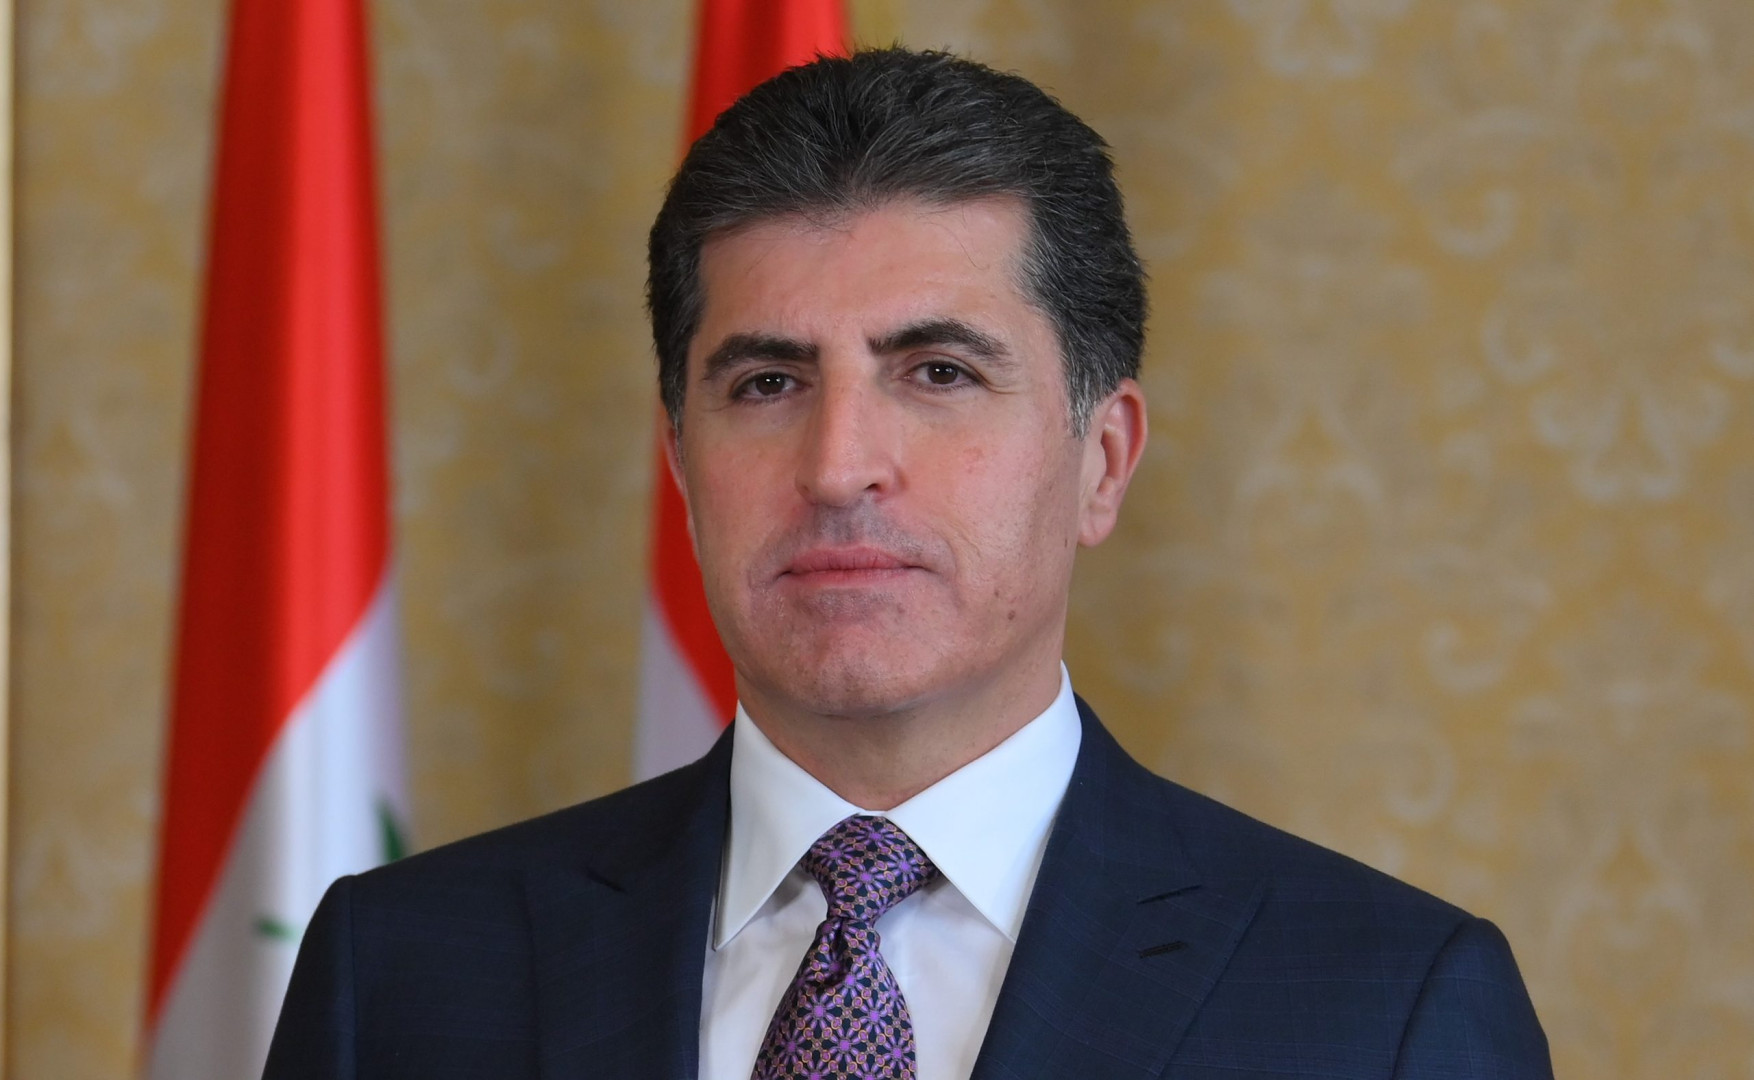 Kurdistan President commemorates Anfal campaign victims, calls for international recognition